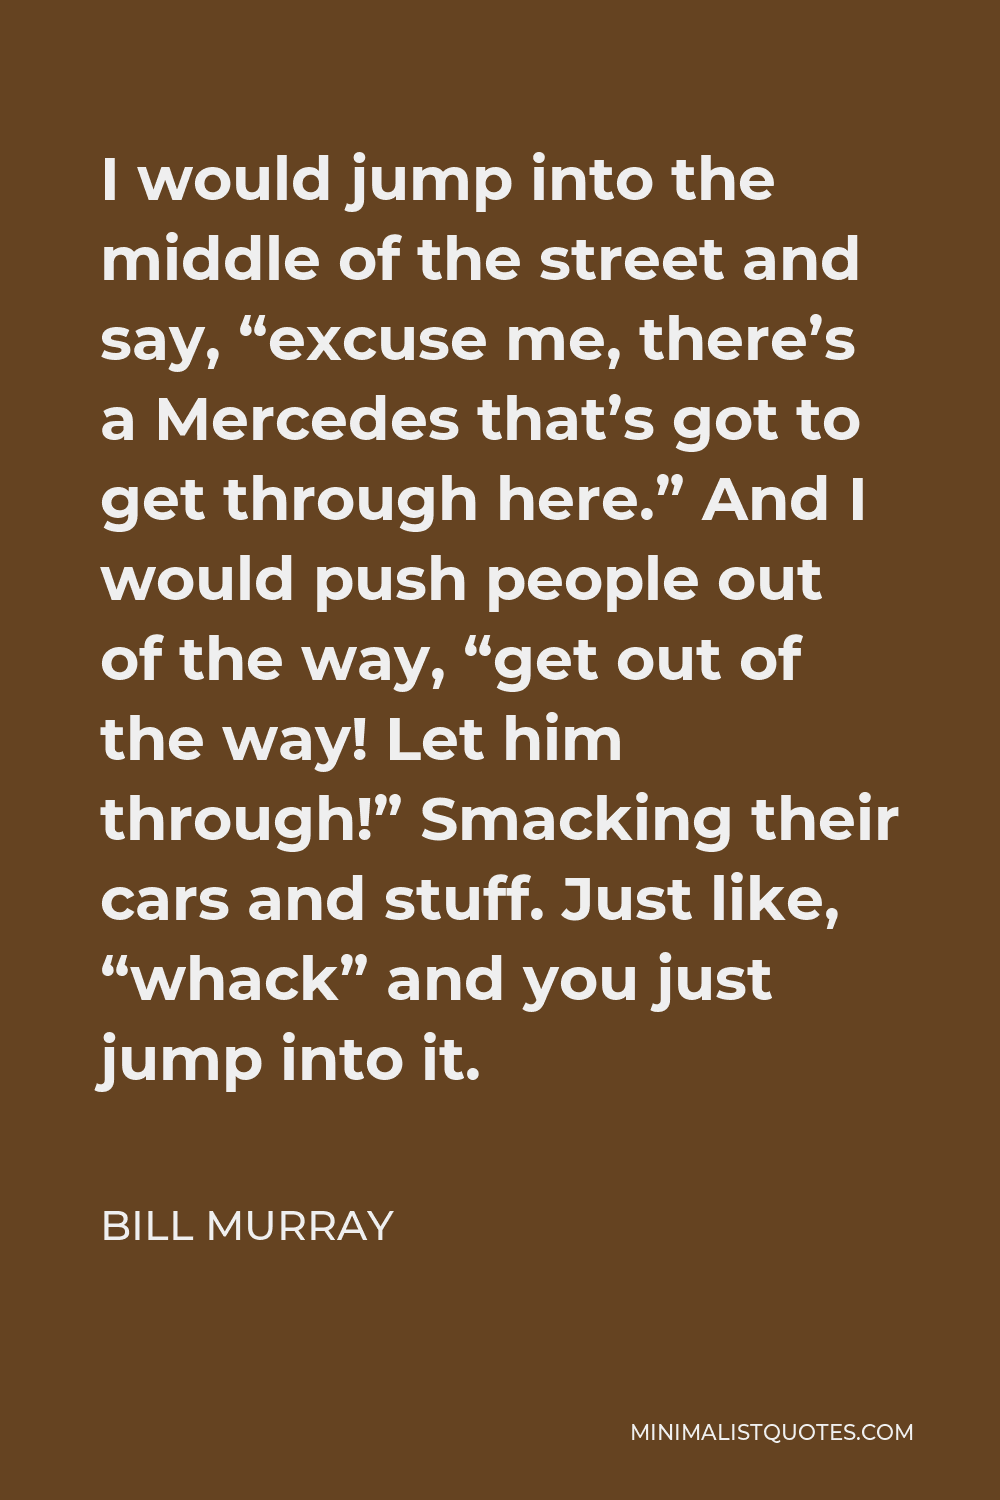 Bill Murray Quote - I would jump into the middle of the street and say, “excuse me, there’s a Mercedes that’s got to get through here.” And I would push people out of the way, “get out of the way! Let him through!” Smacking their cars and stuff. Just like, “whack” and you just jump into it.